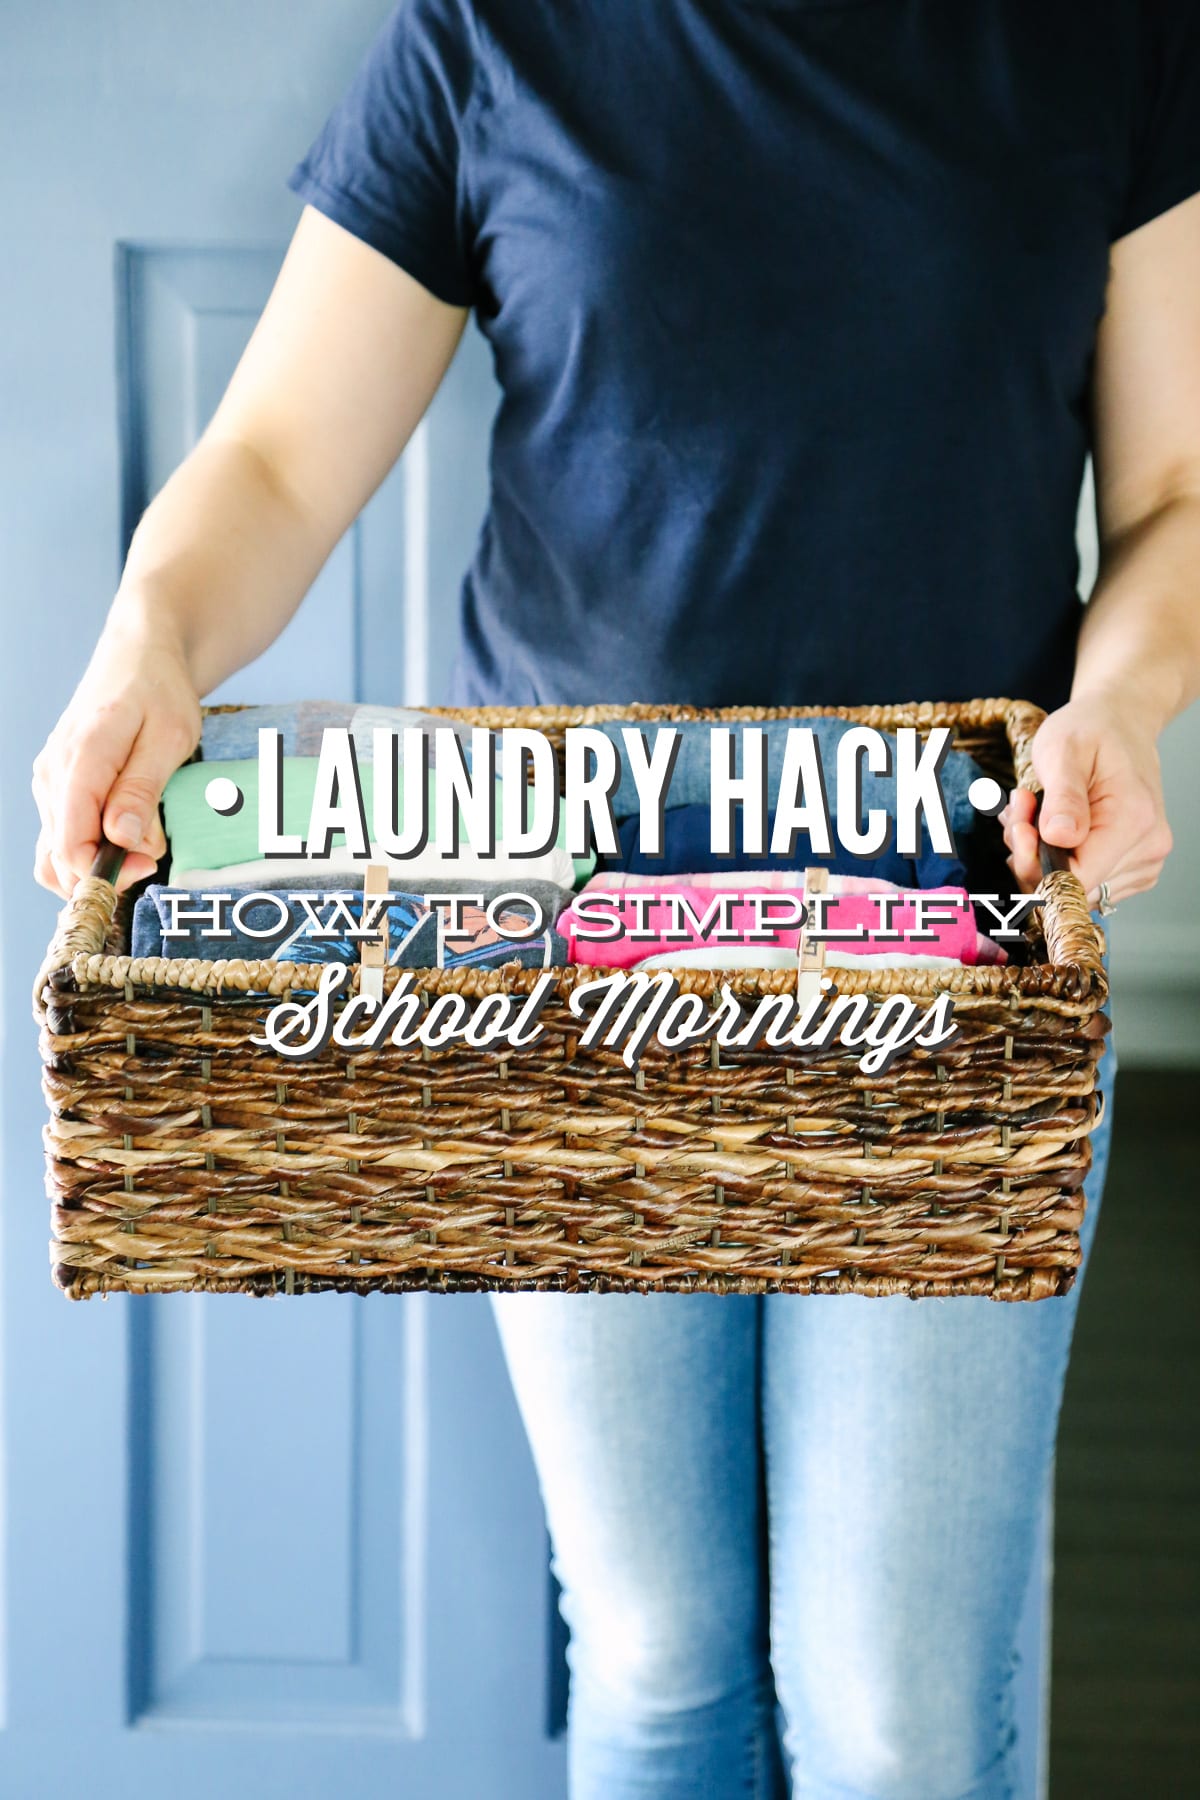 The Laundry Box Hack: How to Simplify School Mornings